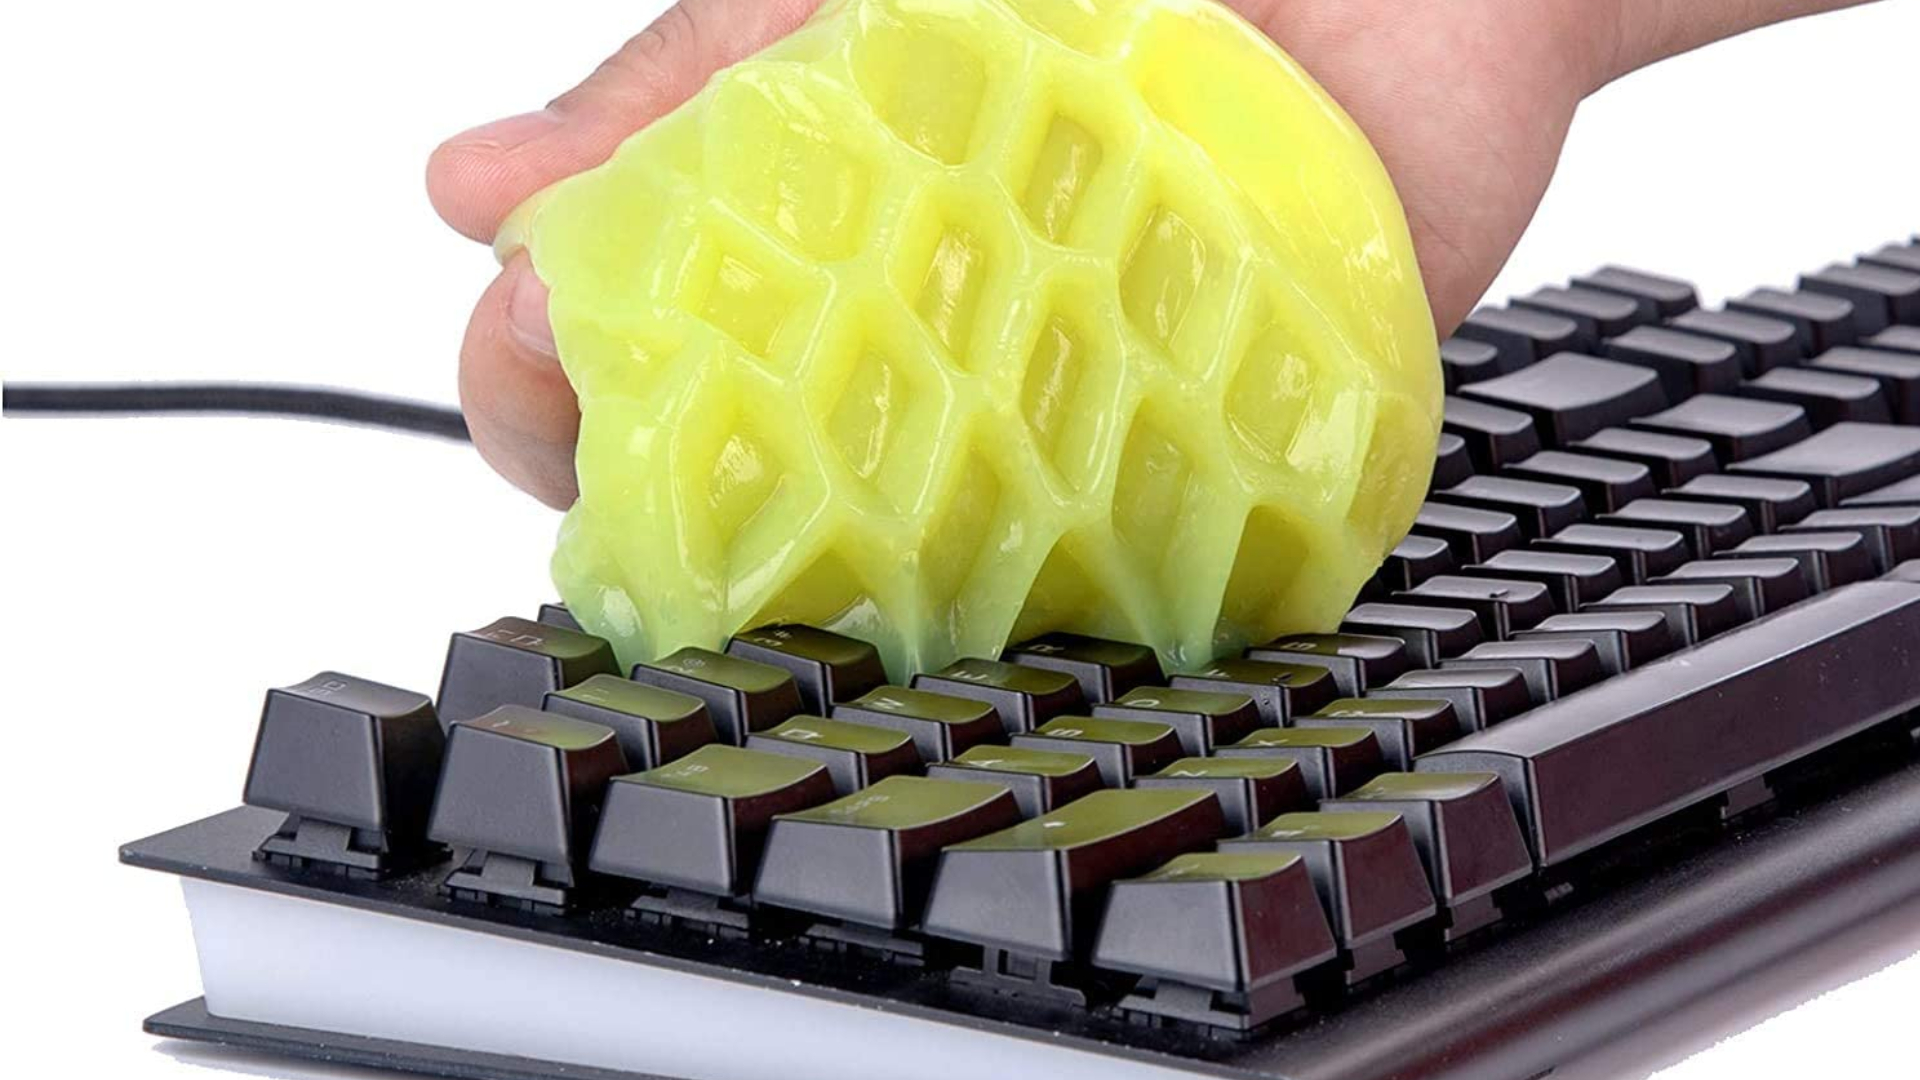 How to clean the keyboard: Generic keyboard with someone using putty gel